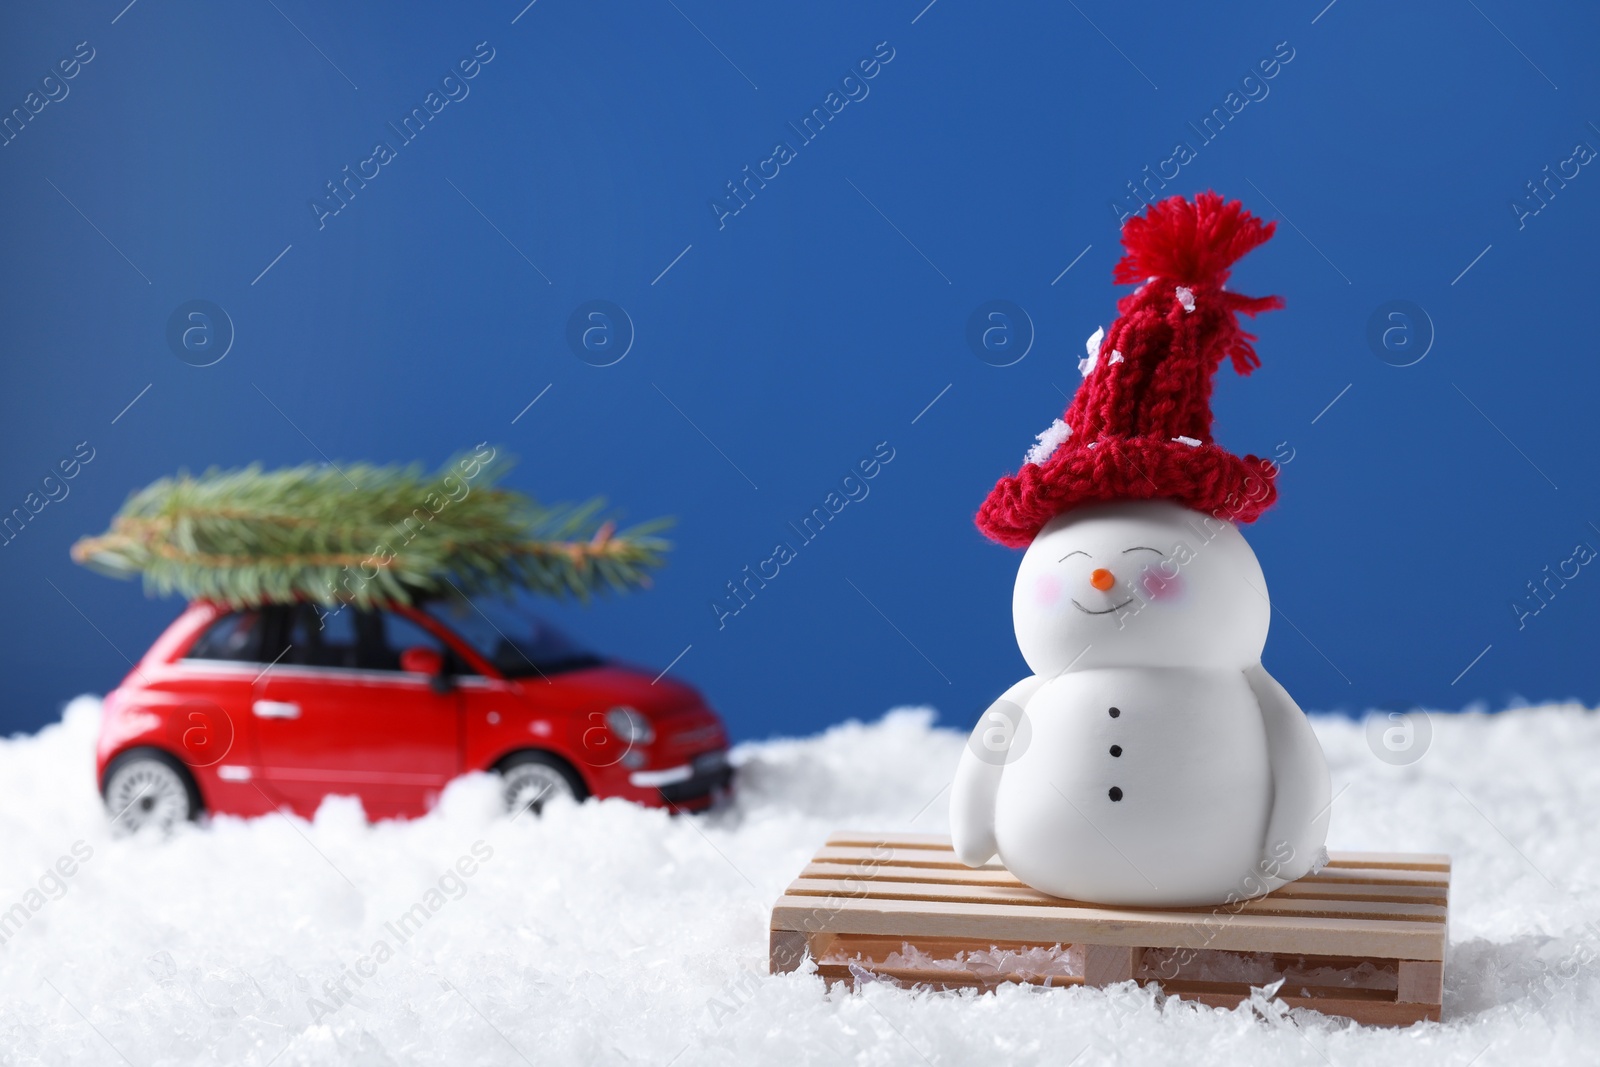 Photo of Cute decorative snowman and toy car with fir tree branches on artificial snow against blue background